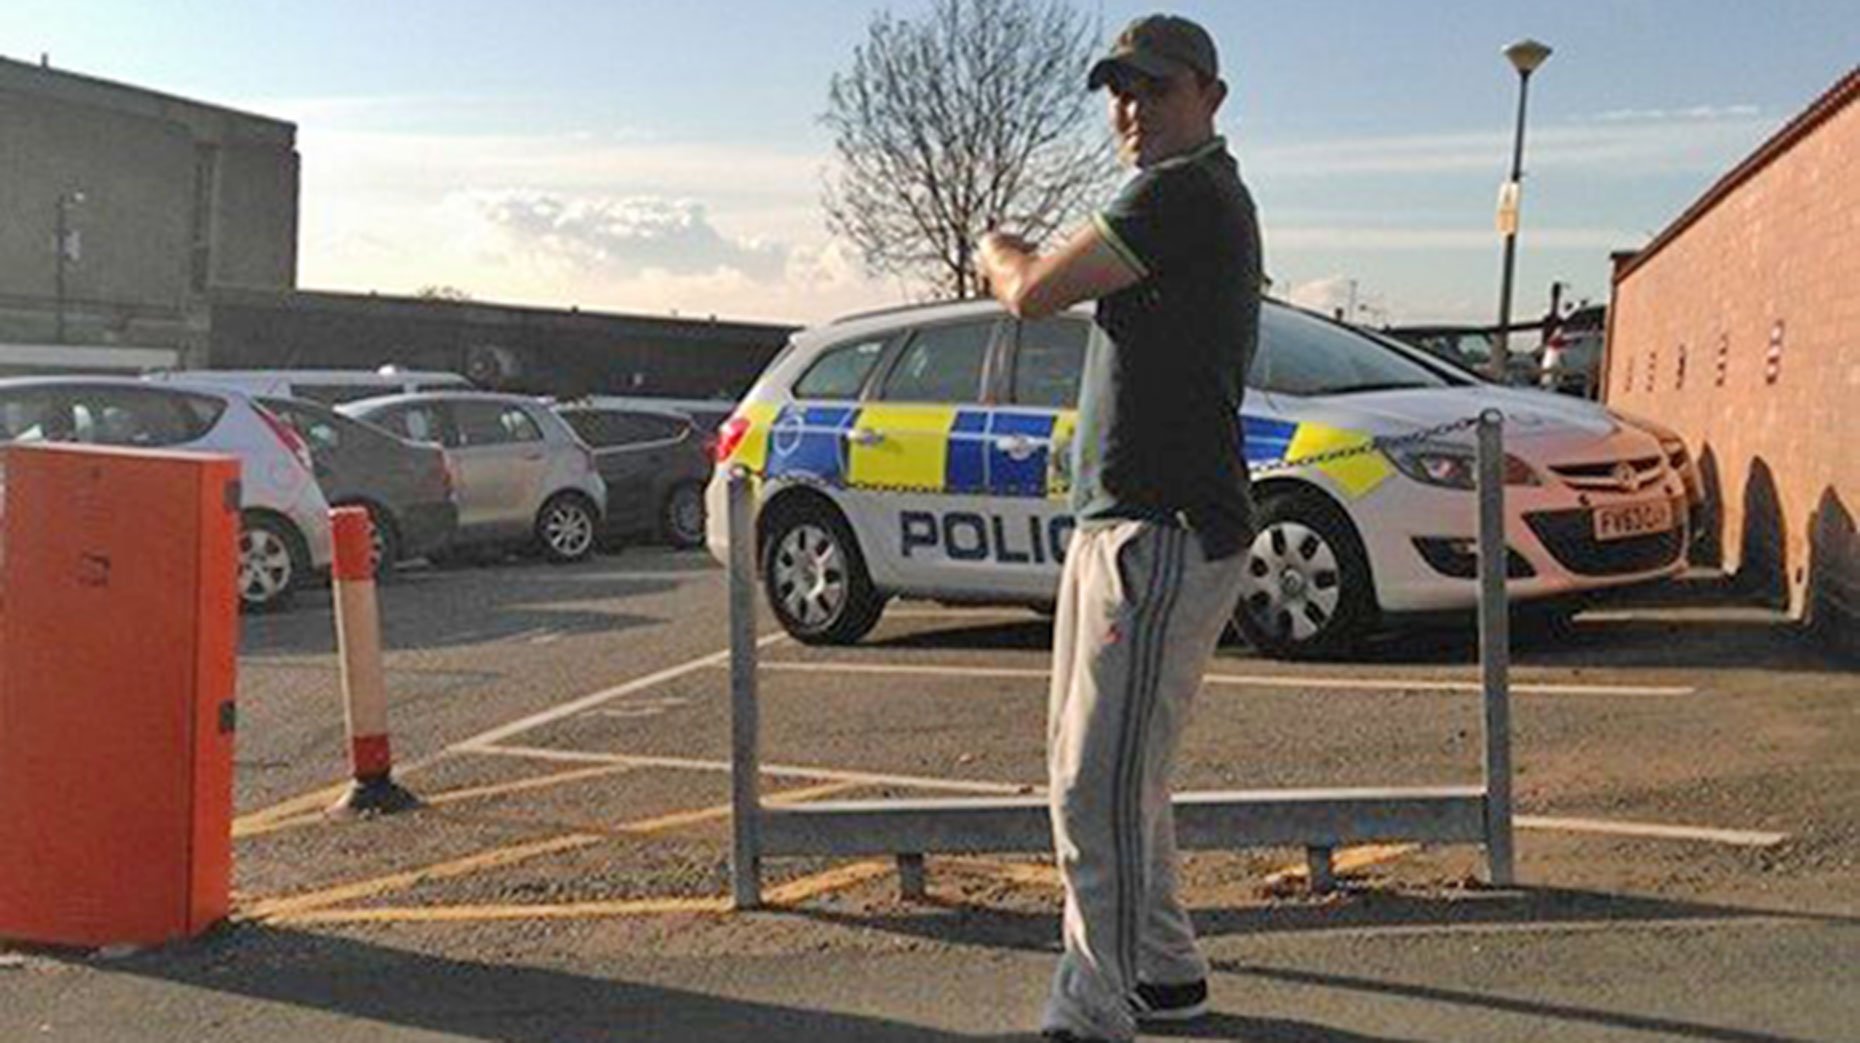 Aaron Bee posted a number of comments and pictures taunting Lincolnshire Police . This picture was captioned: "Just a quick selfie outside Lincoln police station #theystillcantcatchme"